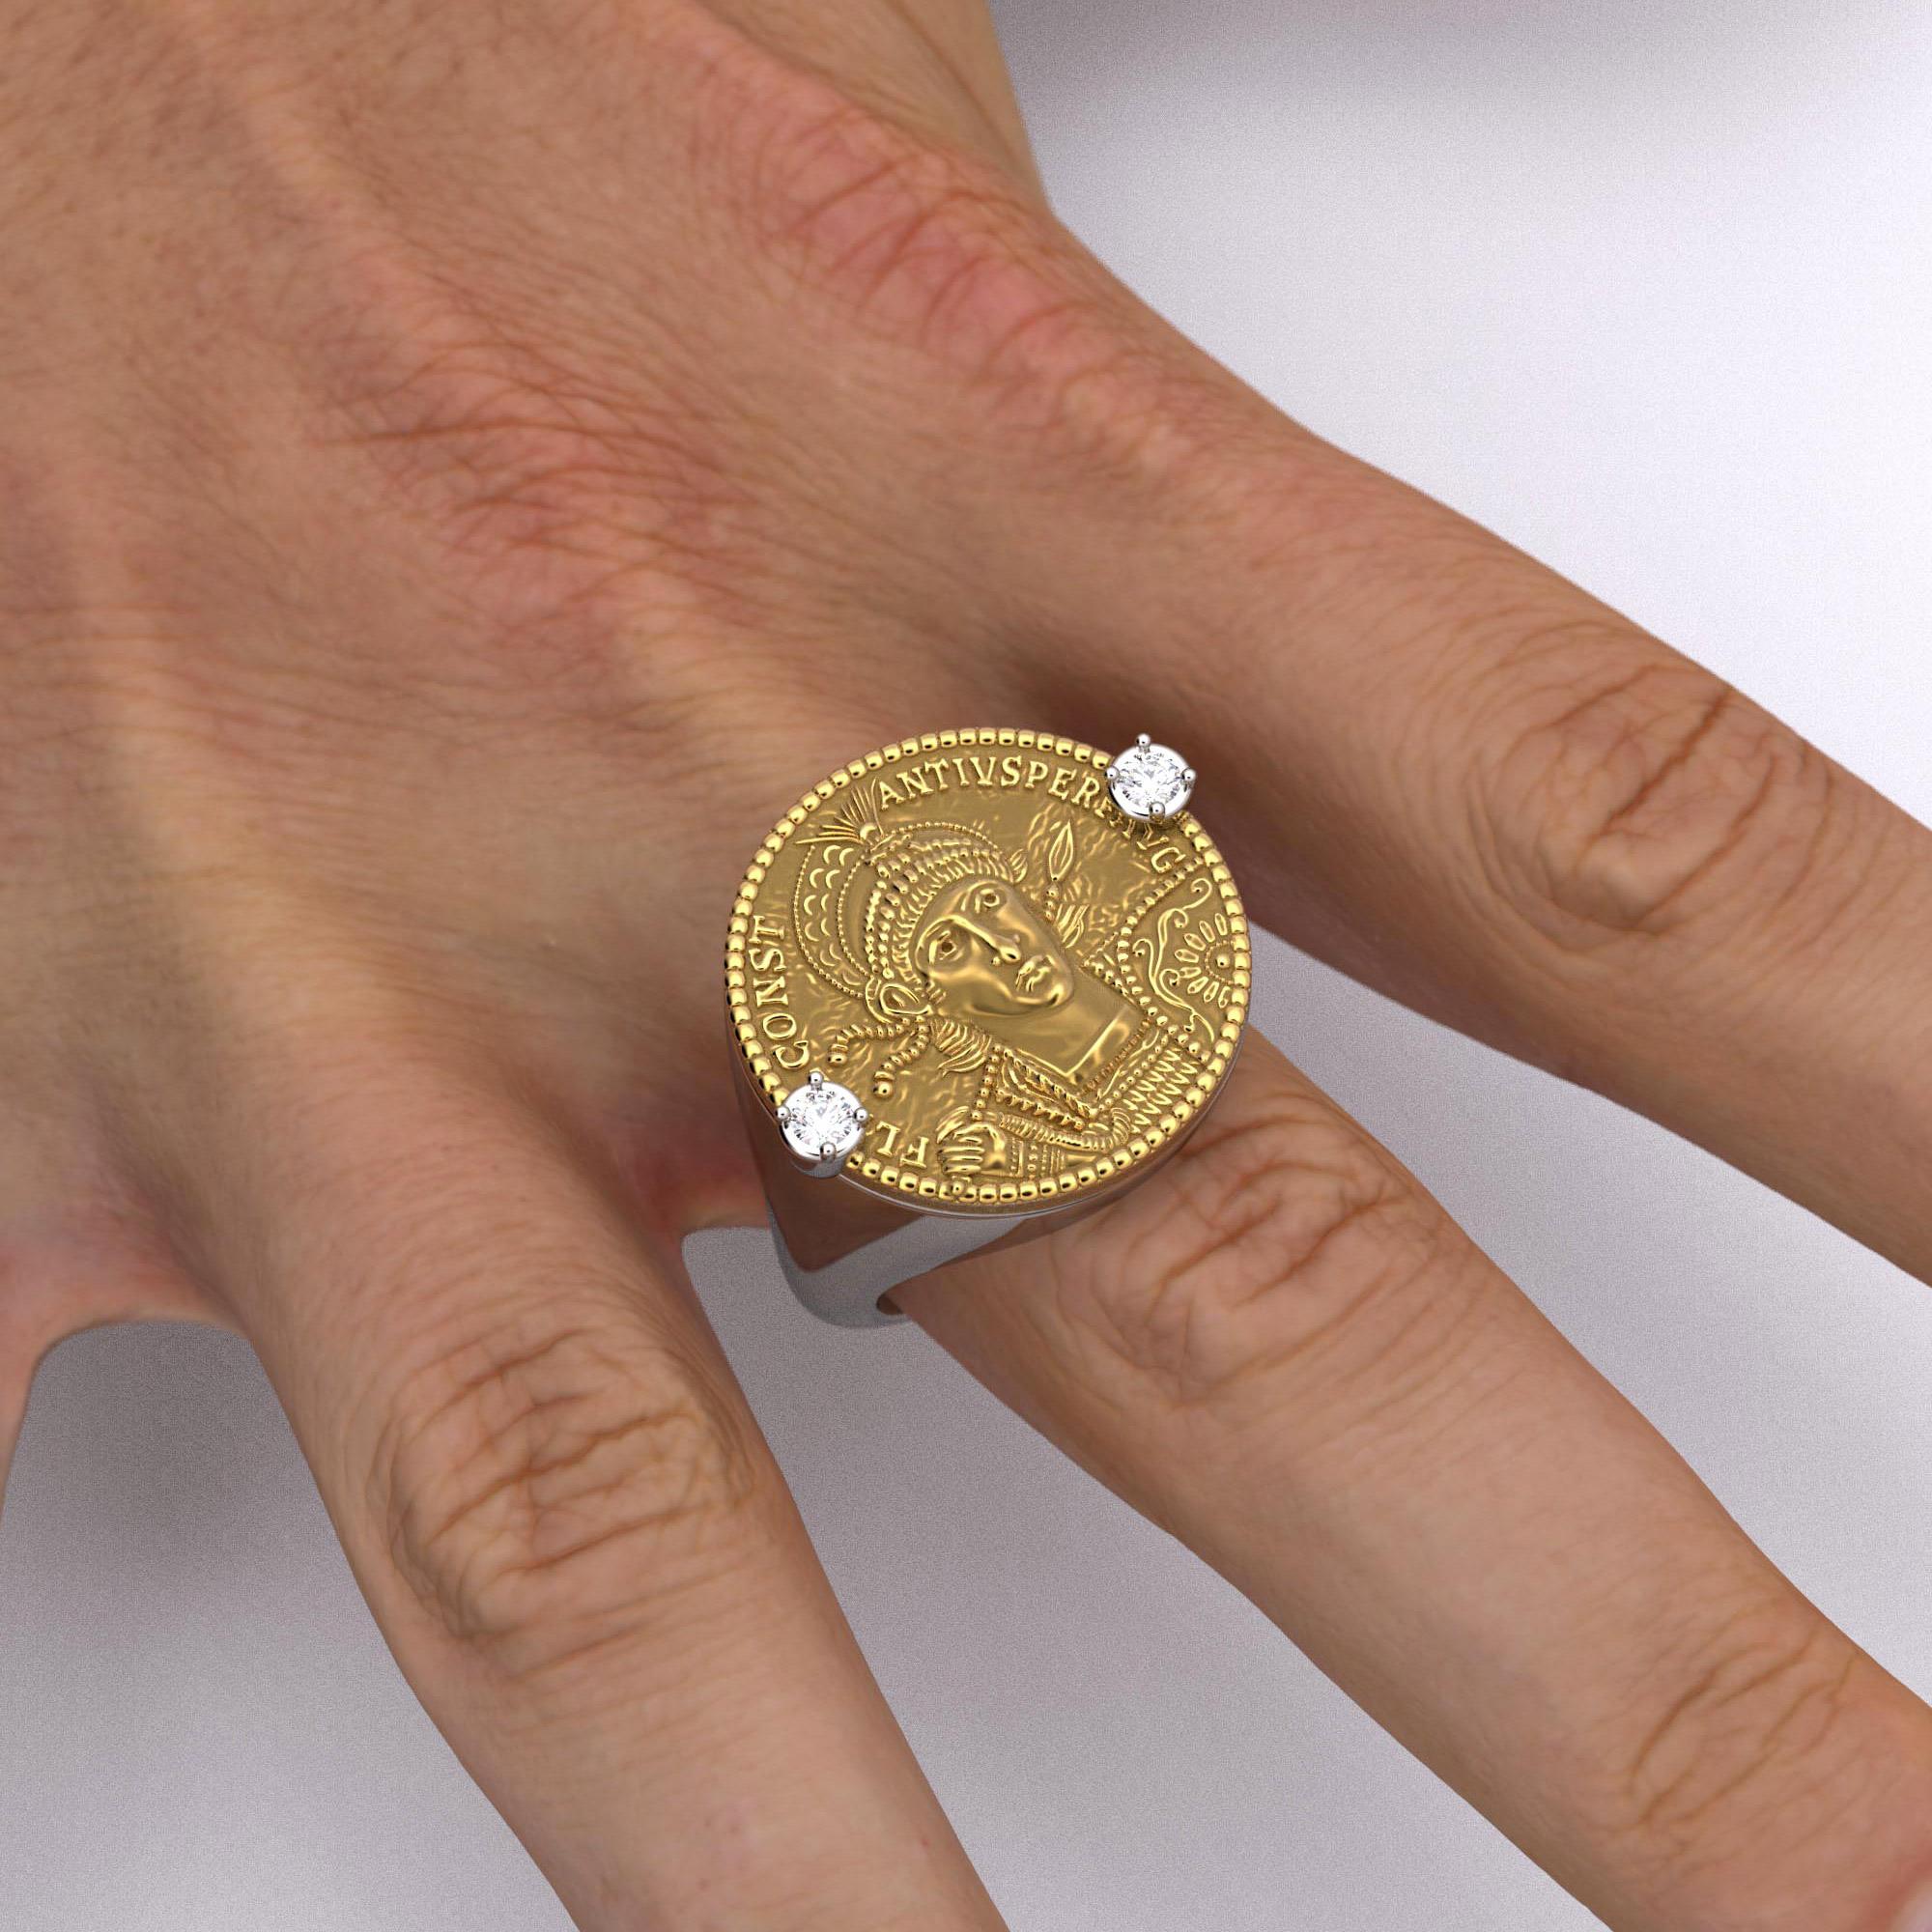 For Sale:  14k Ancient Roman Style Gold Coin Ring with a reproduction of a Roman Solidus 10